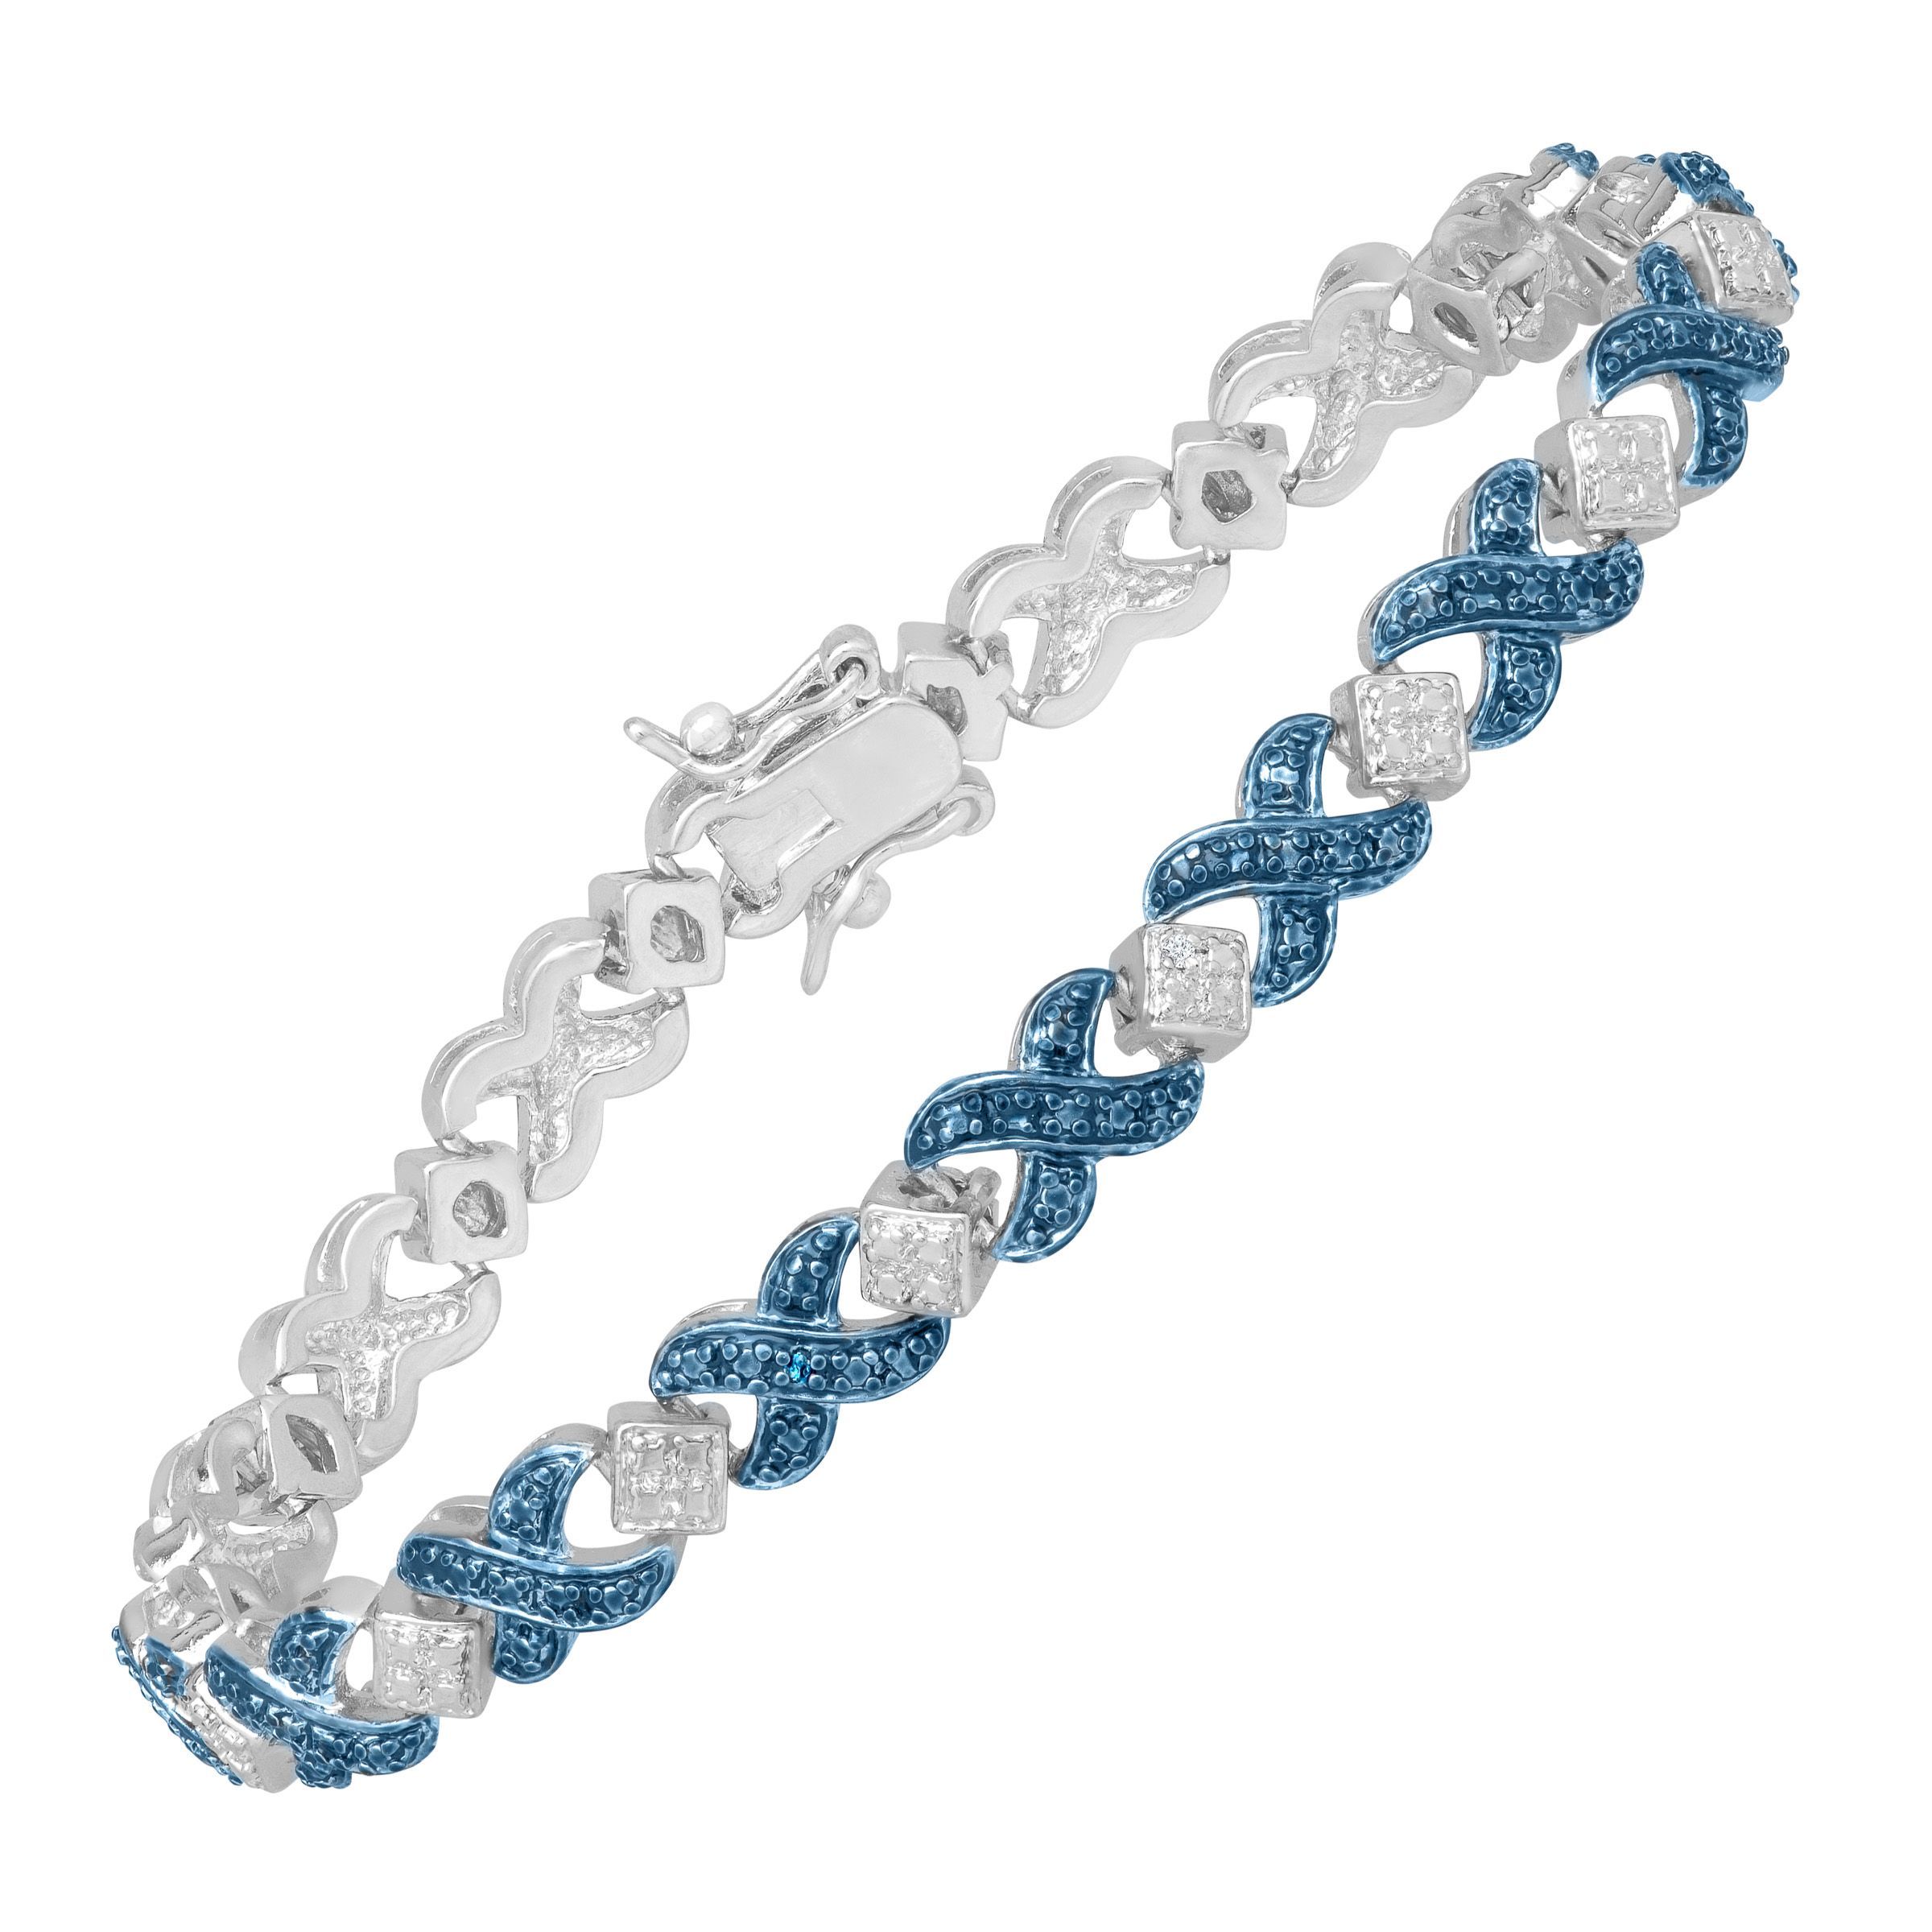 XOXO Tennis Bracelet with Blue Diamond in Sterling Silver-Plated Brass, 7 1/4" Finecraft